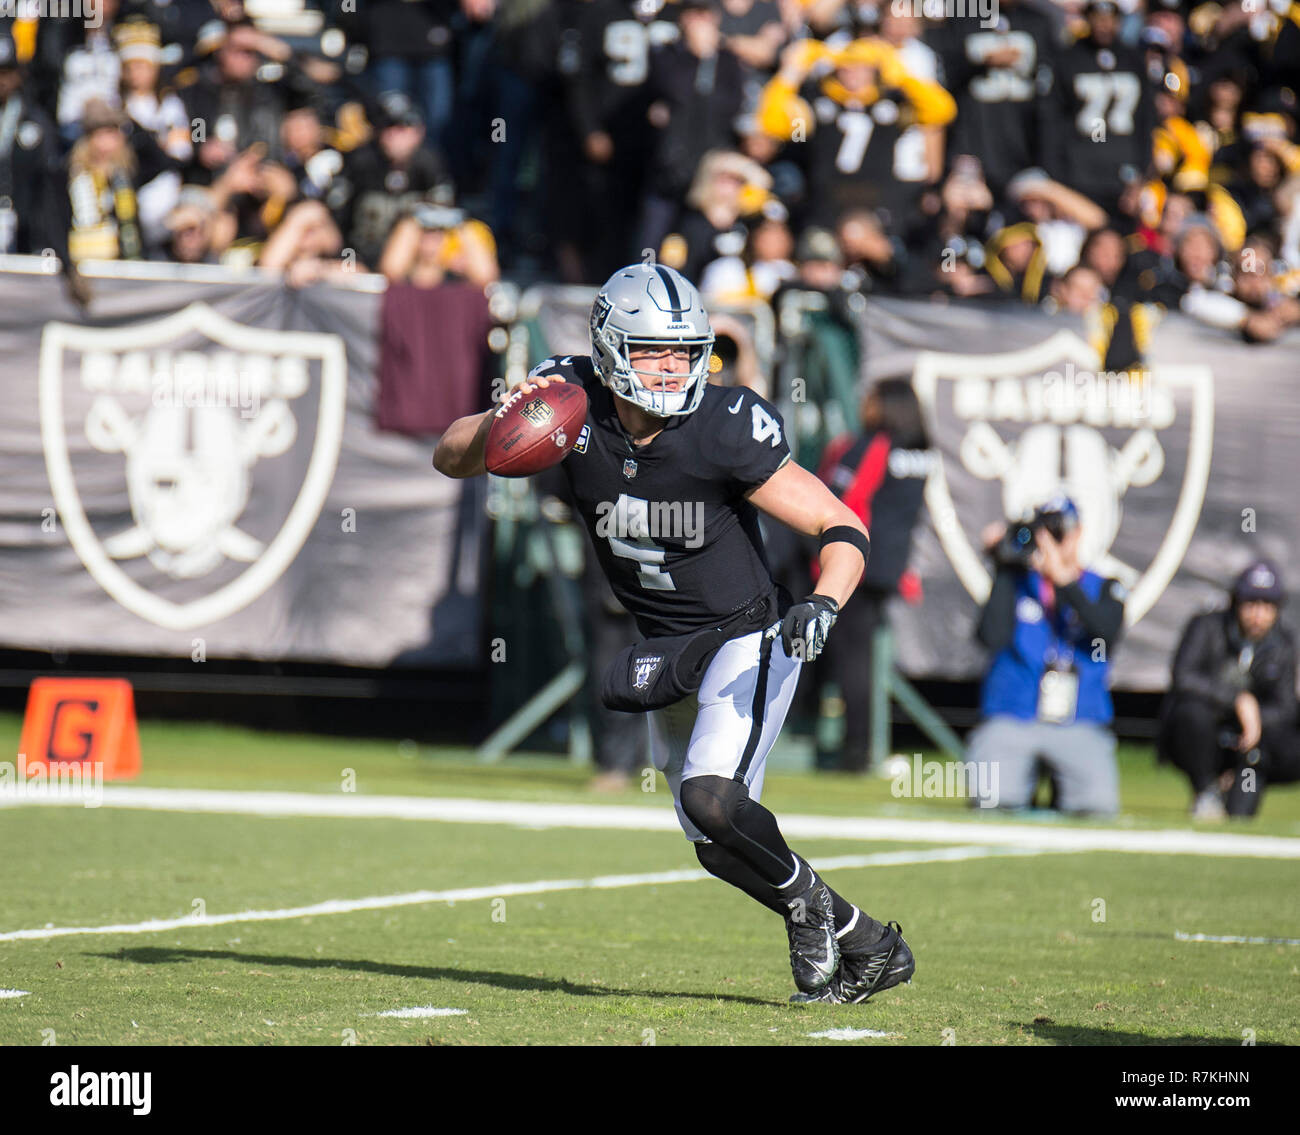 Dec 09 2018 Oakland U.S.A CA Oakland Raiders quarterback Derek Carr (4) looks for short pass during the NFL Football game between Pittsburgh Steelers and the Oakland Raiders 24-21 win at O.co Coliseum Stadium Oakland Calif. Thurman James/CSM Stock Photo